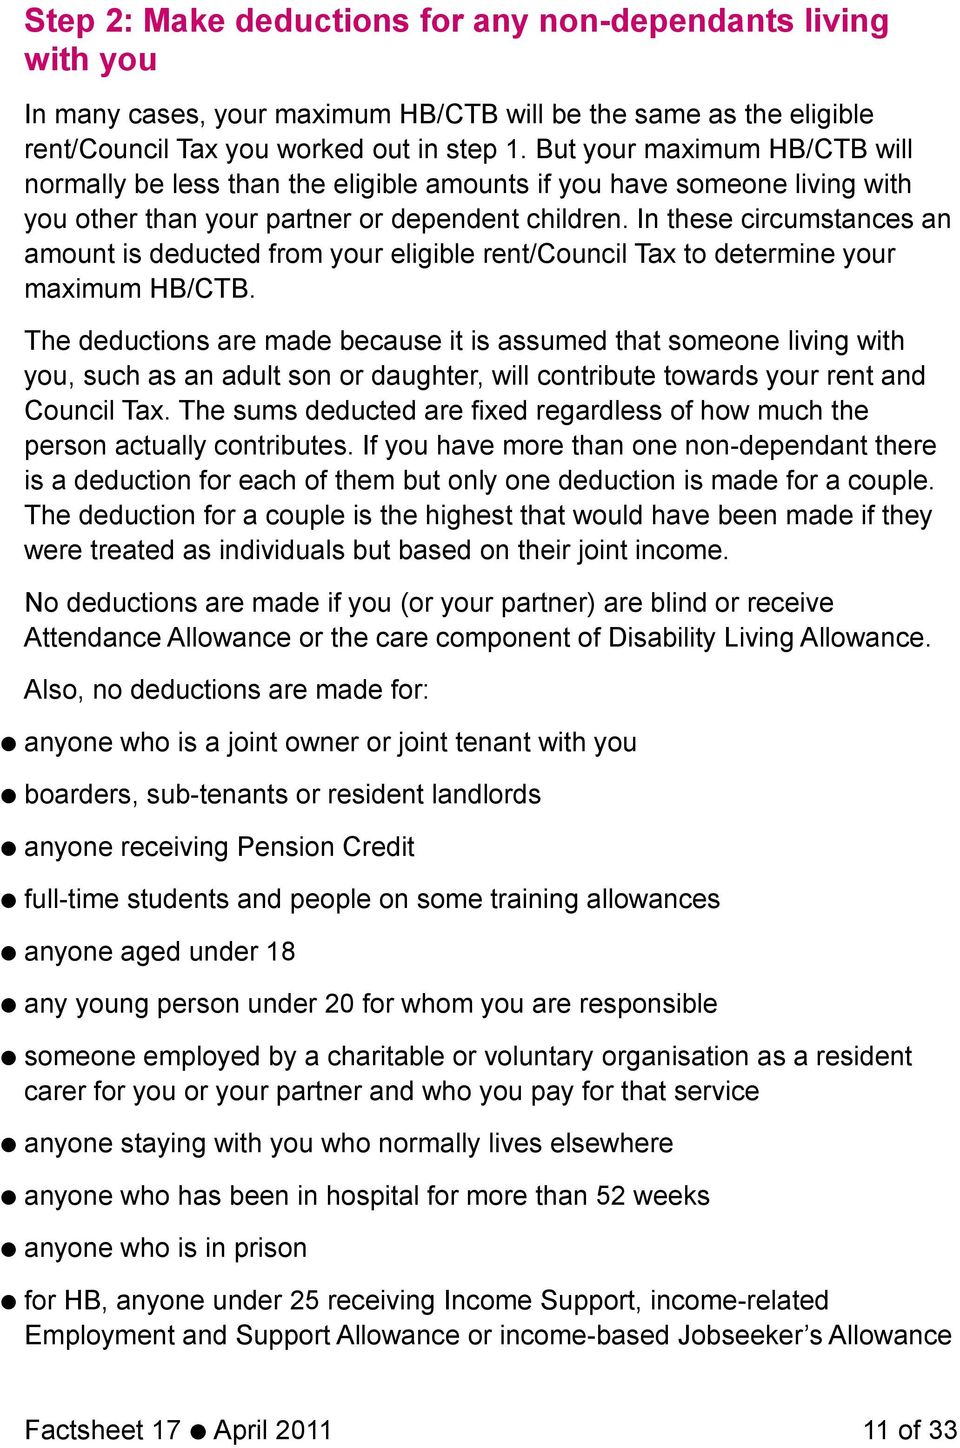 In these circumstances an amount is deducted from your eligible rent/council Tax to determine your maximum HB/CTB.